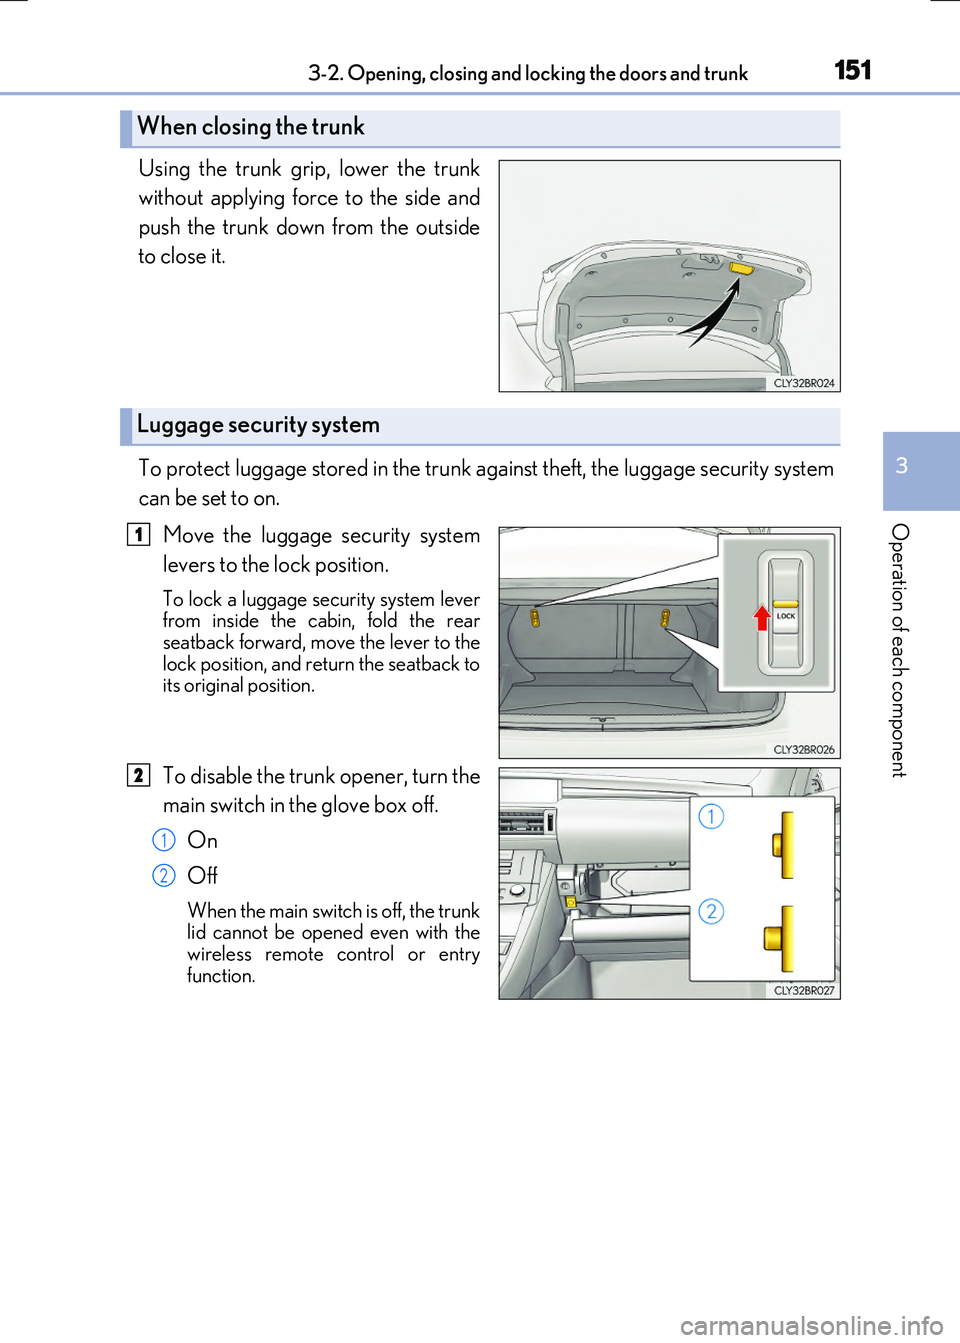 LEXUS RX300H 2017  Owners Manual 1513-2. Opening, closing and locking the doors and trunk
3
Operation of each component
RC300h_EE(OM24740E)
Using the trunk grip, lower the trunk 
without applying force to the side and 
push the trunk